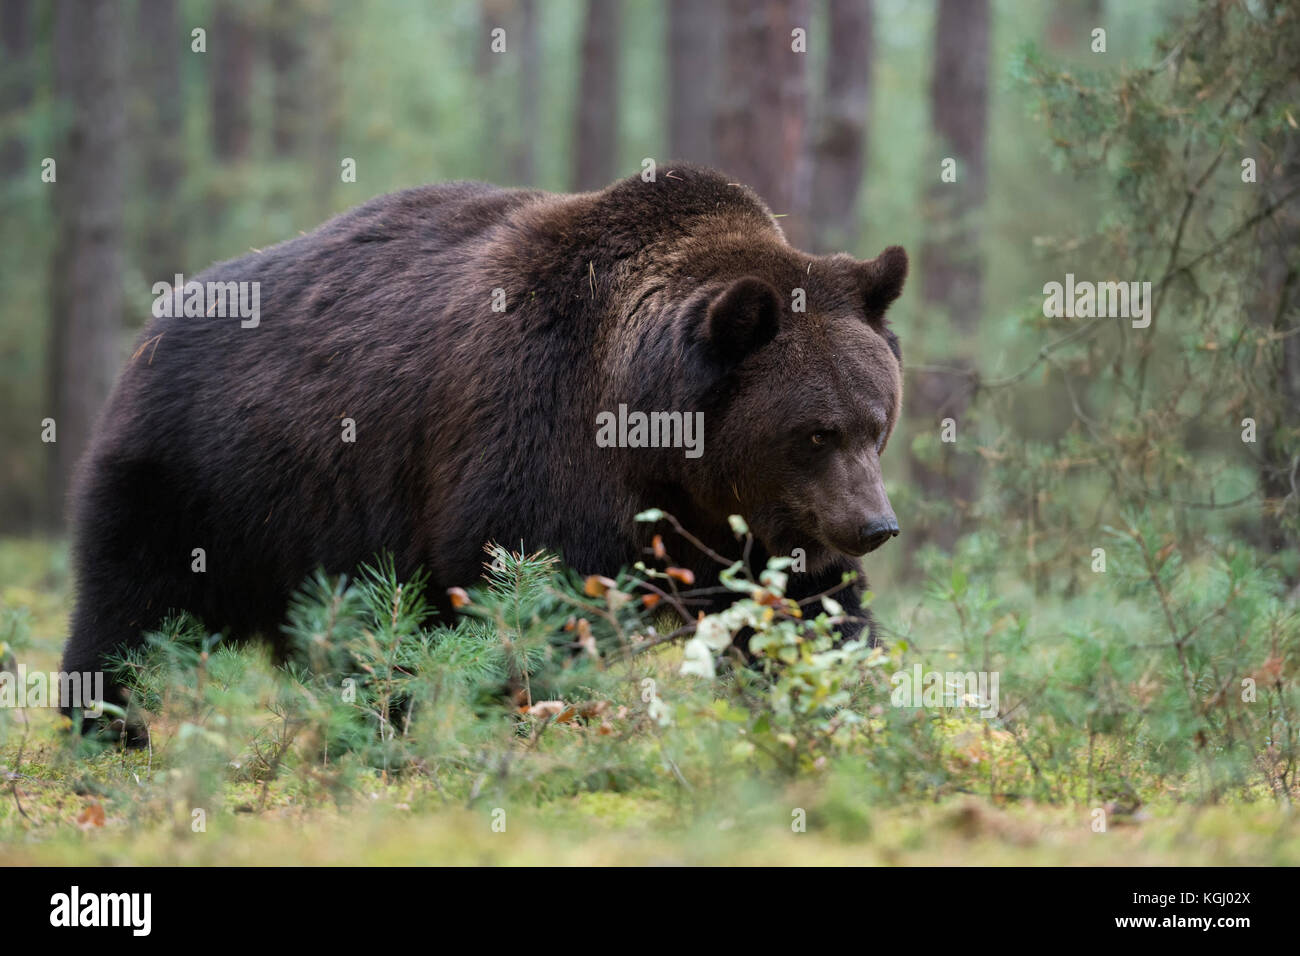 Eurasian Brown Bear / Braunbaer ( Ursus arctos ), strong and powerful, walking through the undergrowth of a boreal forest, Europe. Stock Photo